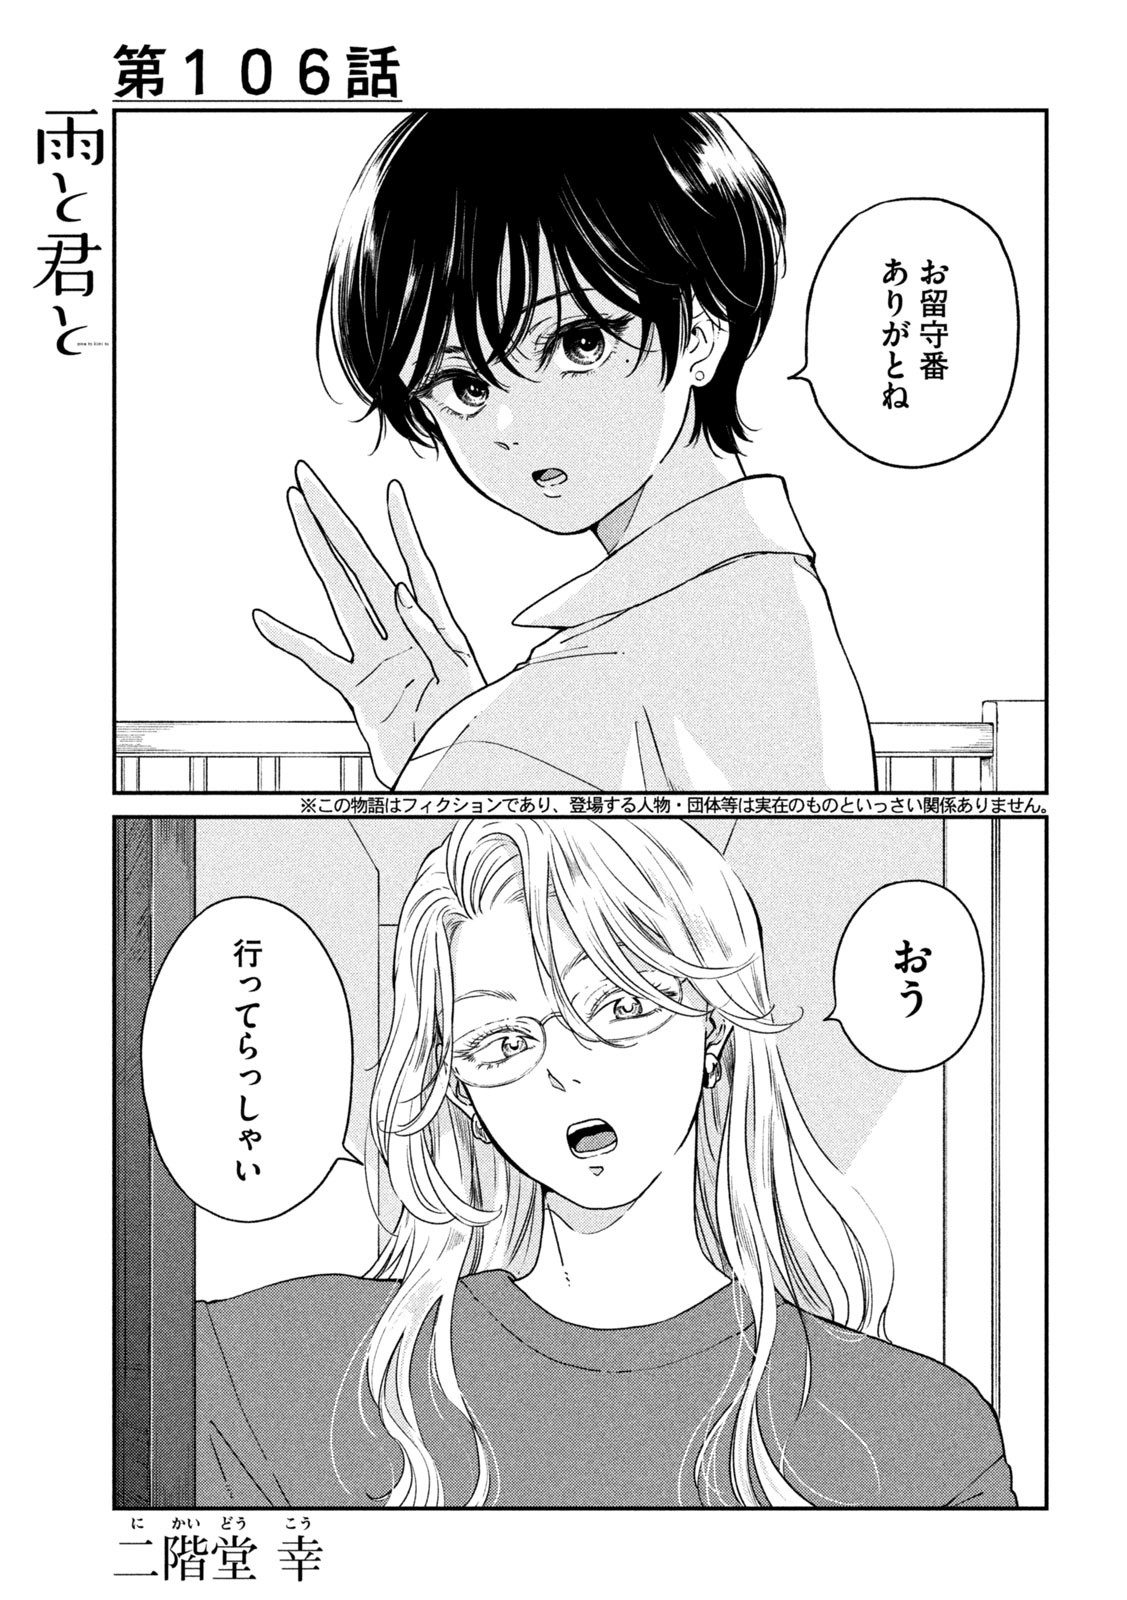 Ame to Kimi to - Chapter 106 - Page 1